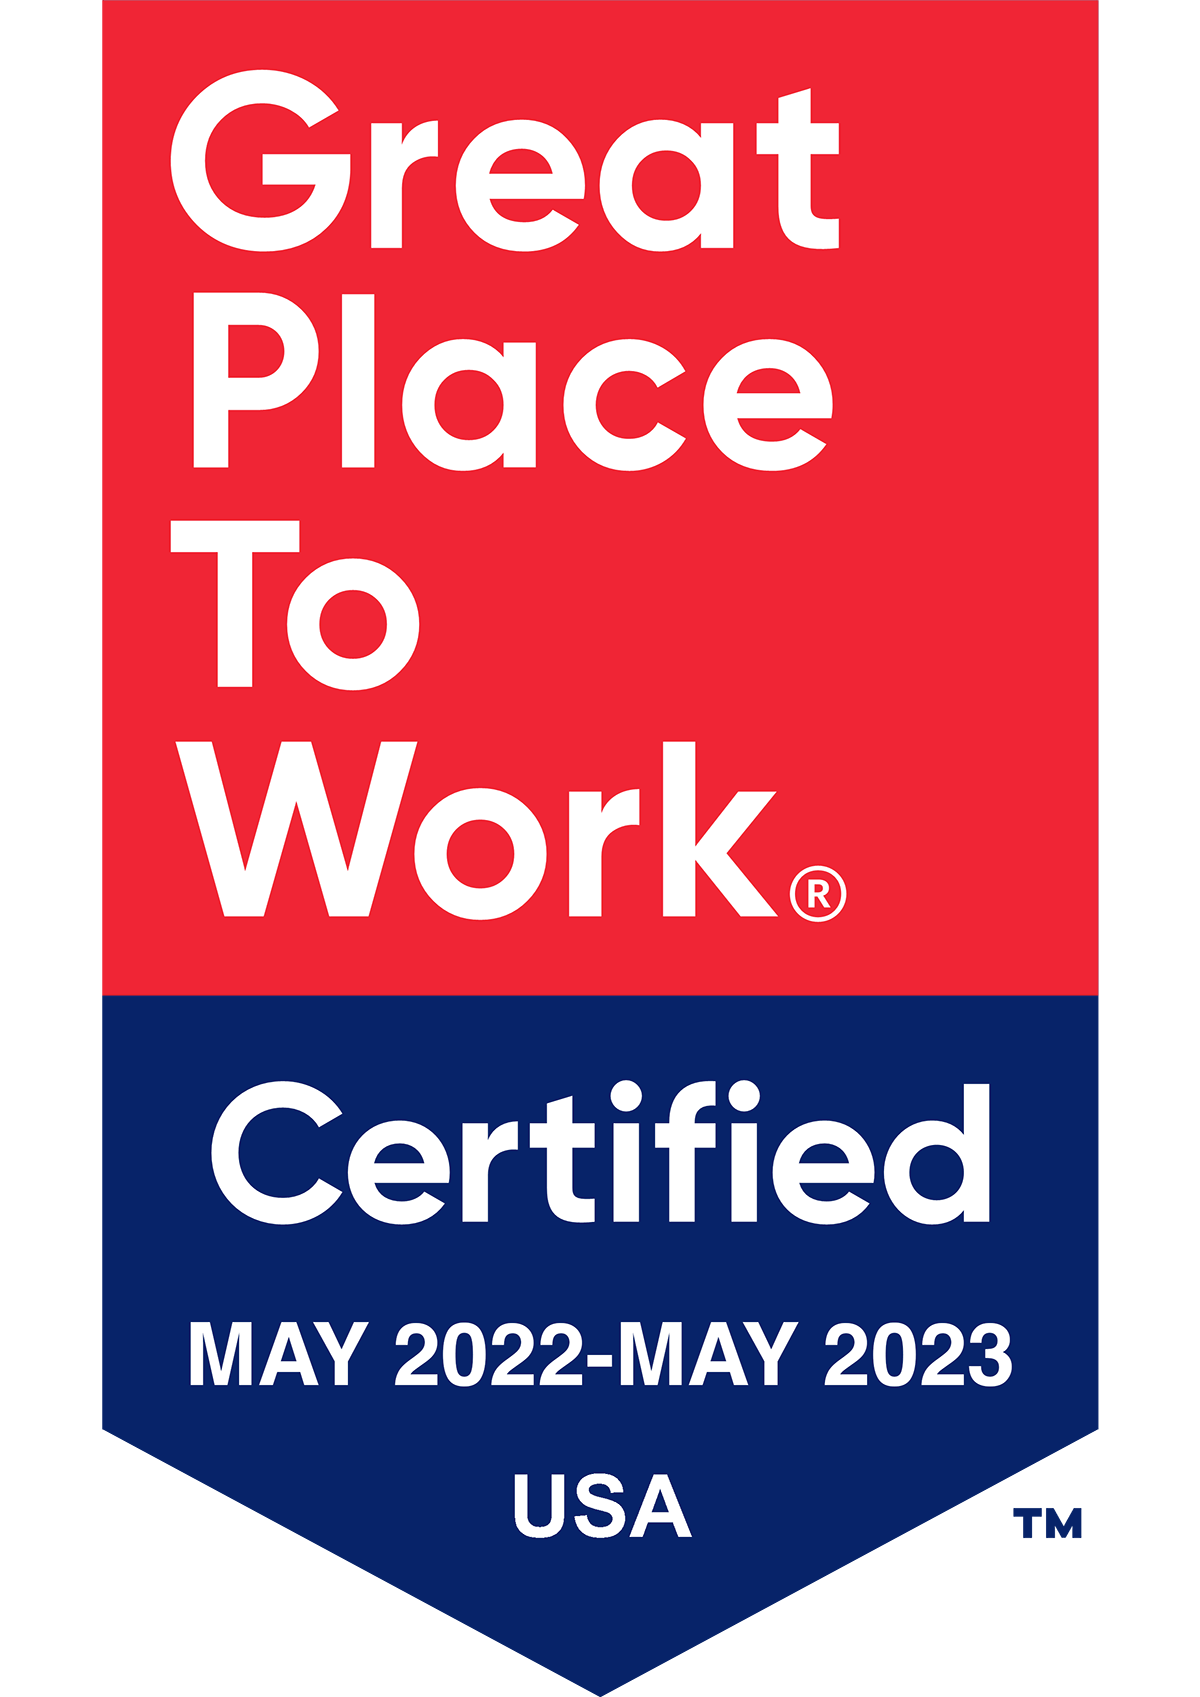 Great Place To Work - Certified May 2022-May 2023